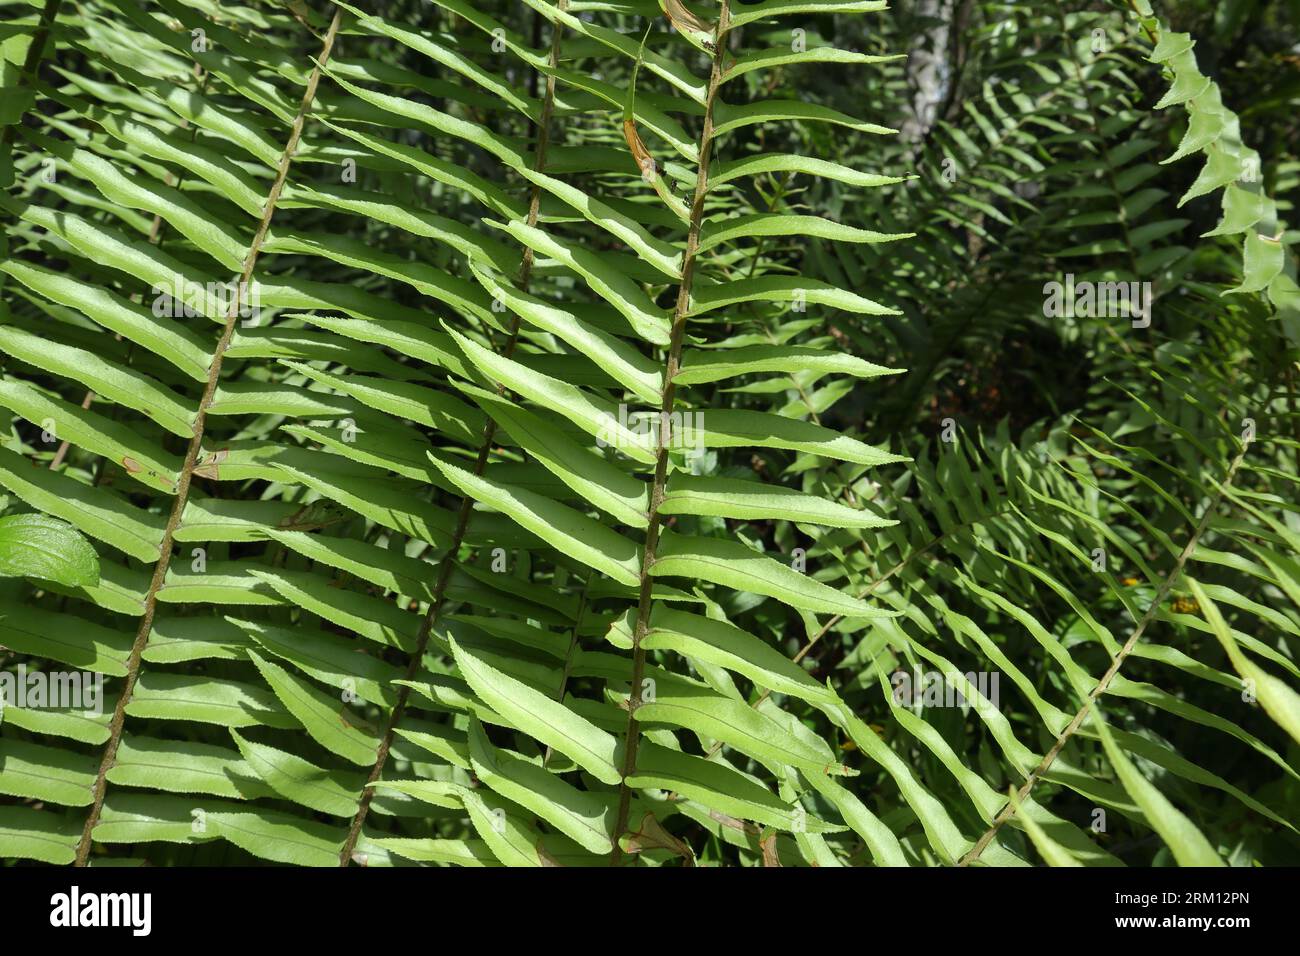 Natural view of the frond leaves belongs to Nephrolepis fern variety growing in a forest area Stock Photo